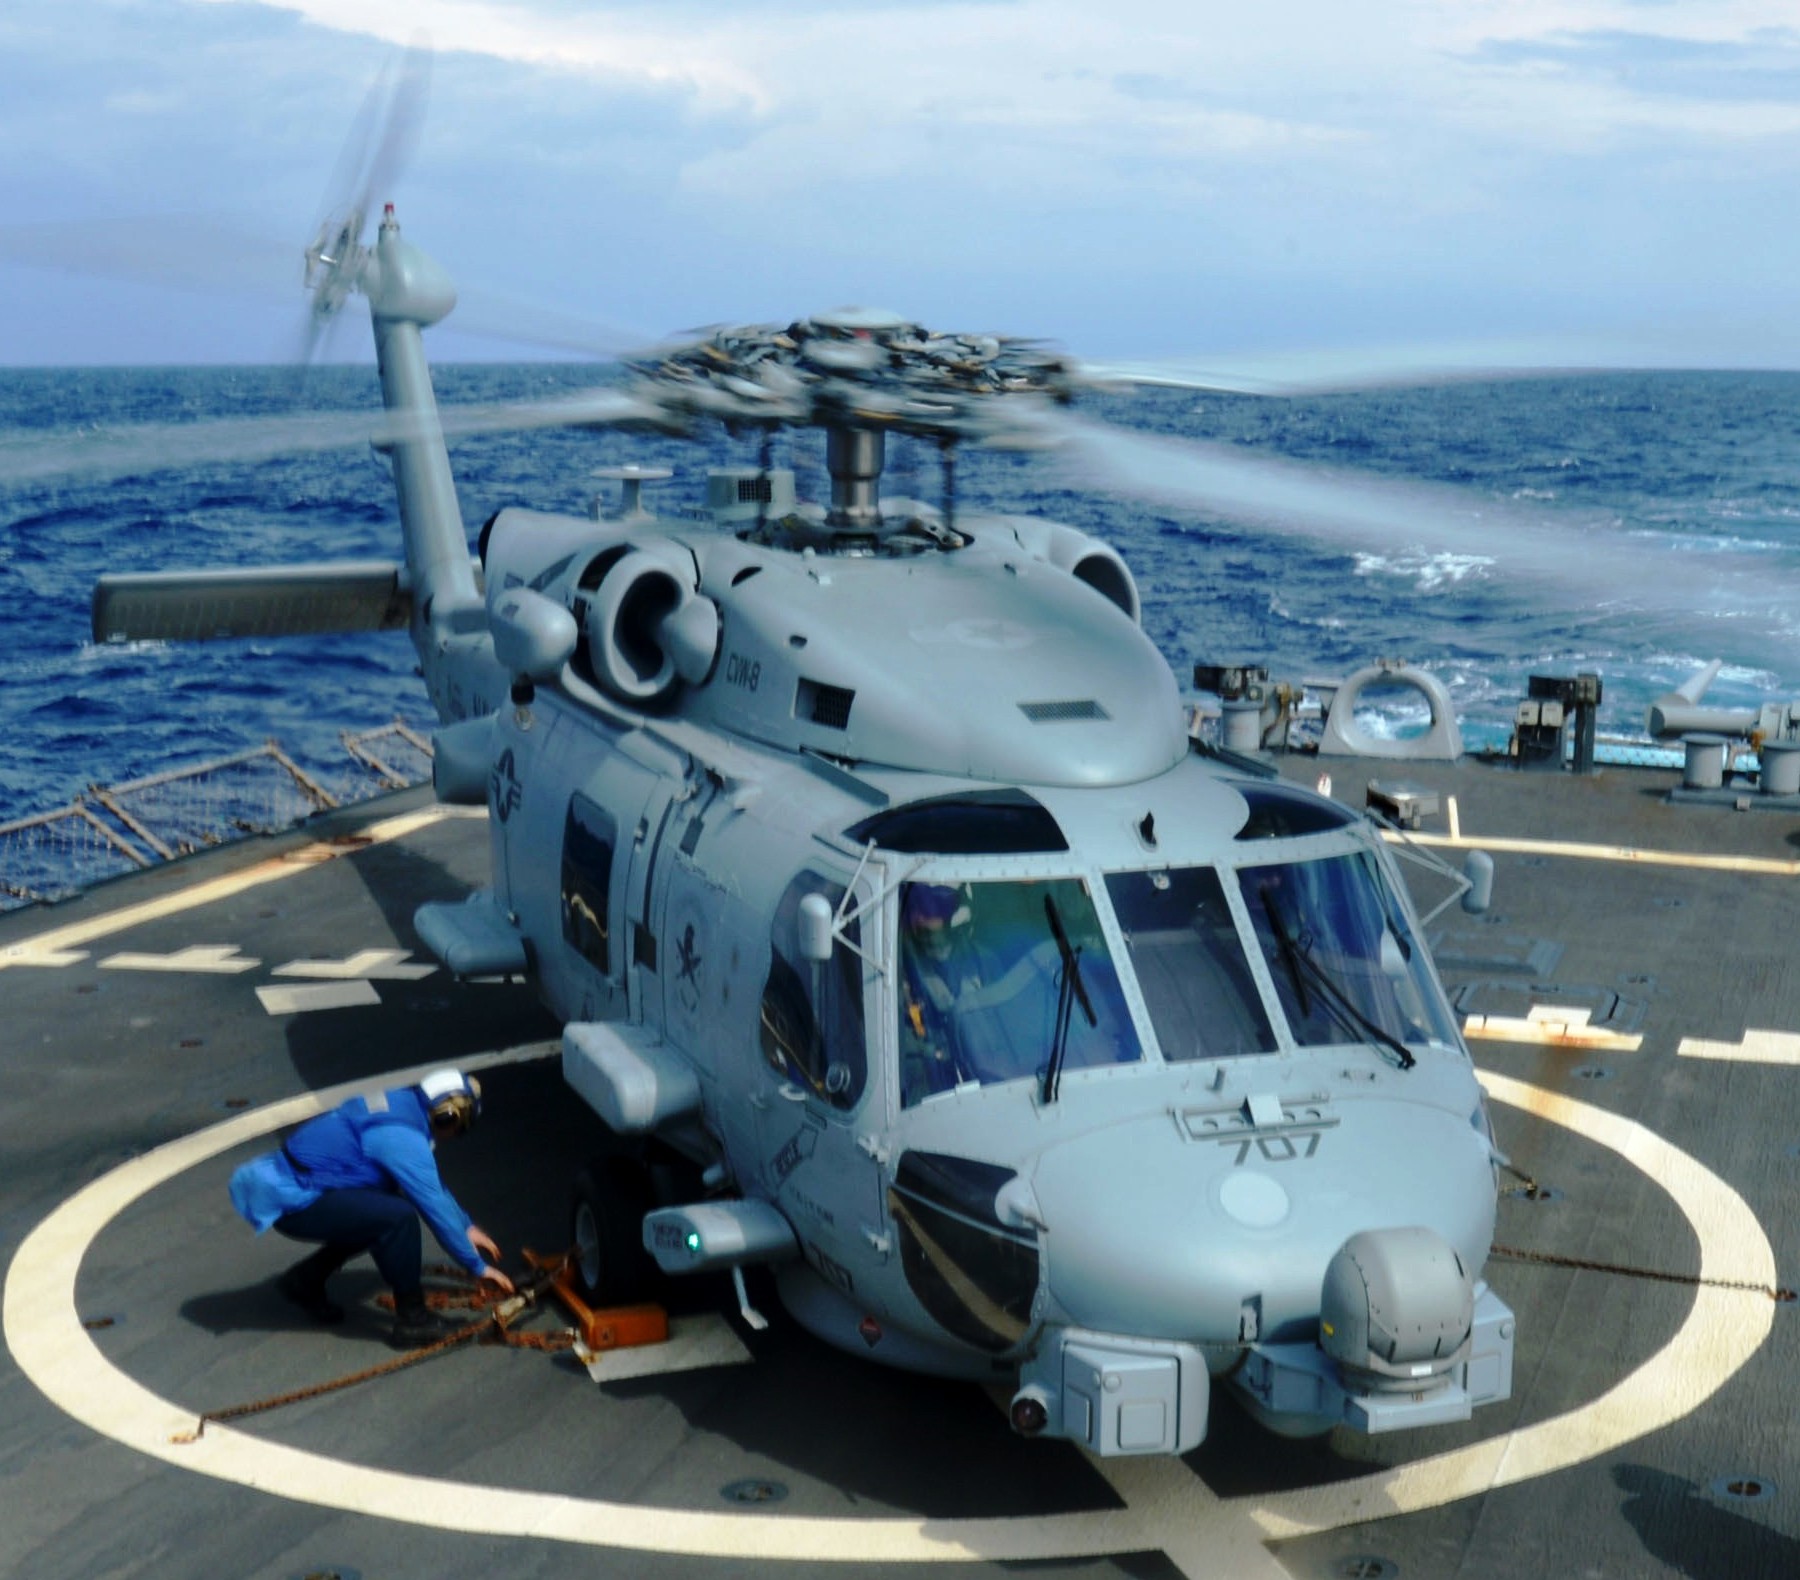 hsm-70 spartans helicopter maritime strike squadron mh-60r seahawk 2014 28 uss ramage ddg-61